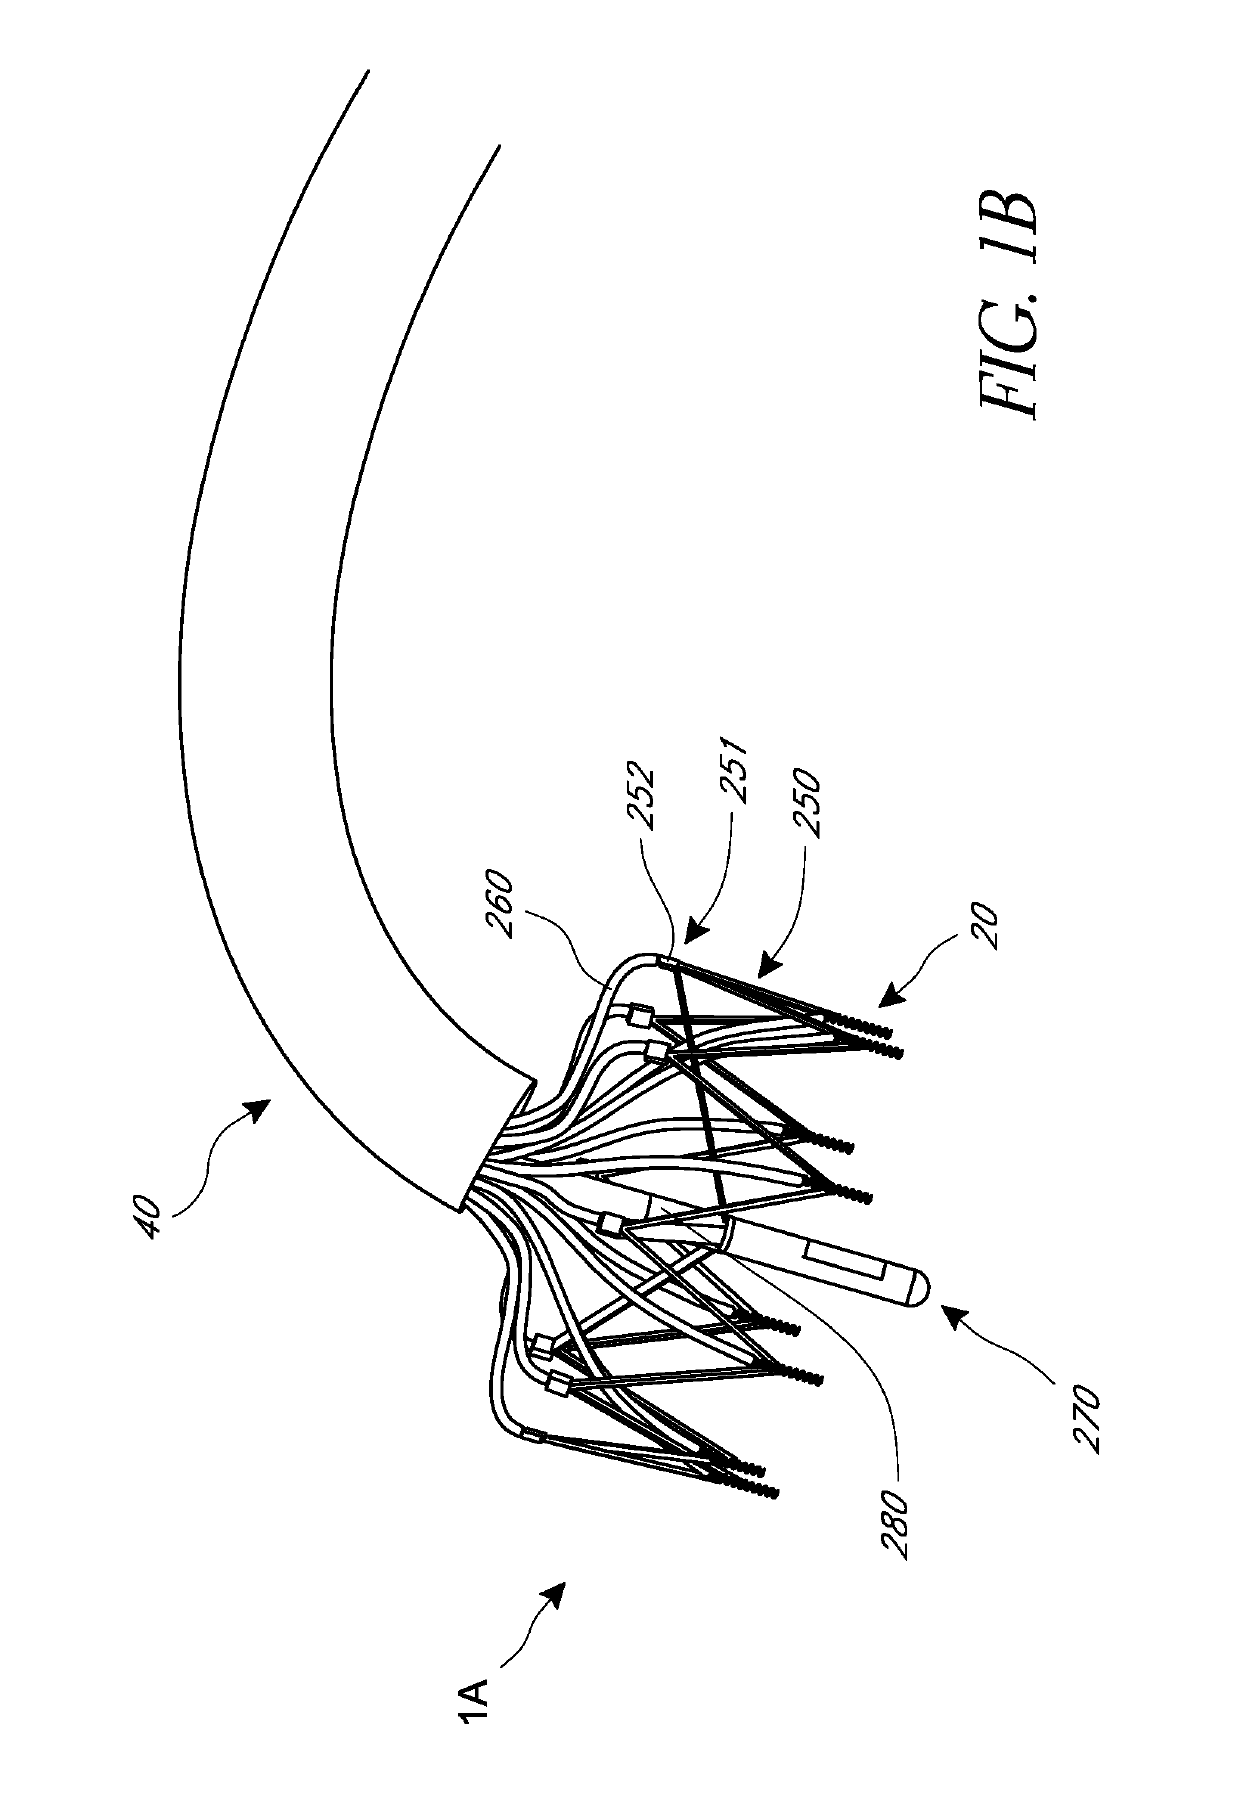 Methods for delivery of heart valve devices using intravascular ultrasound imaging